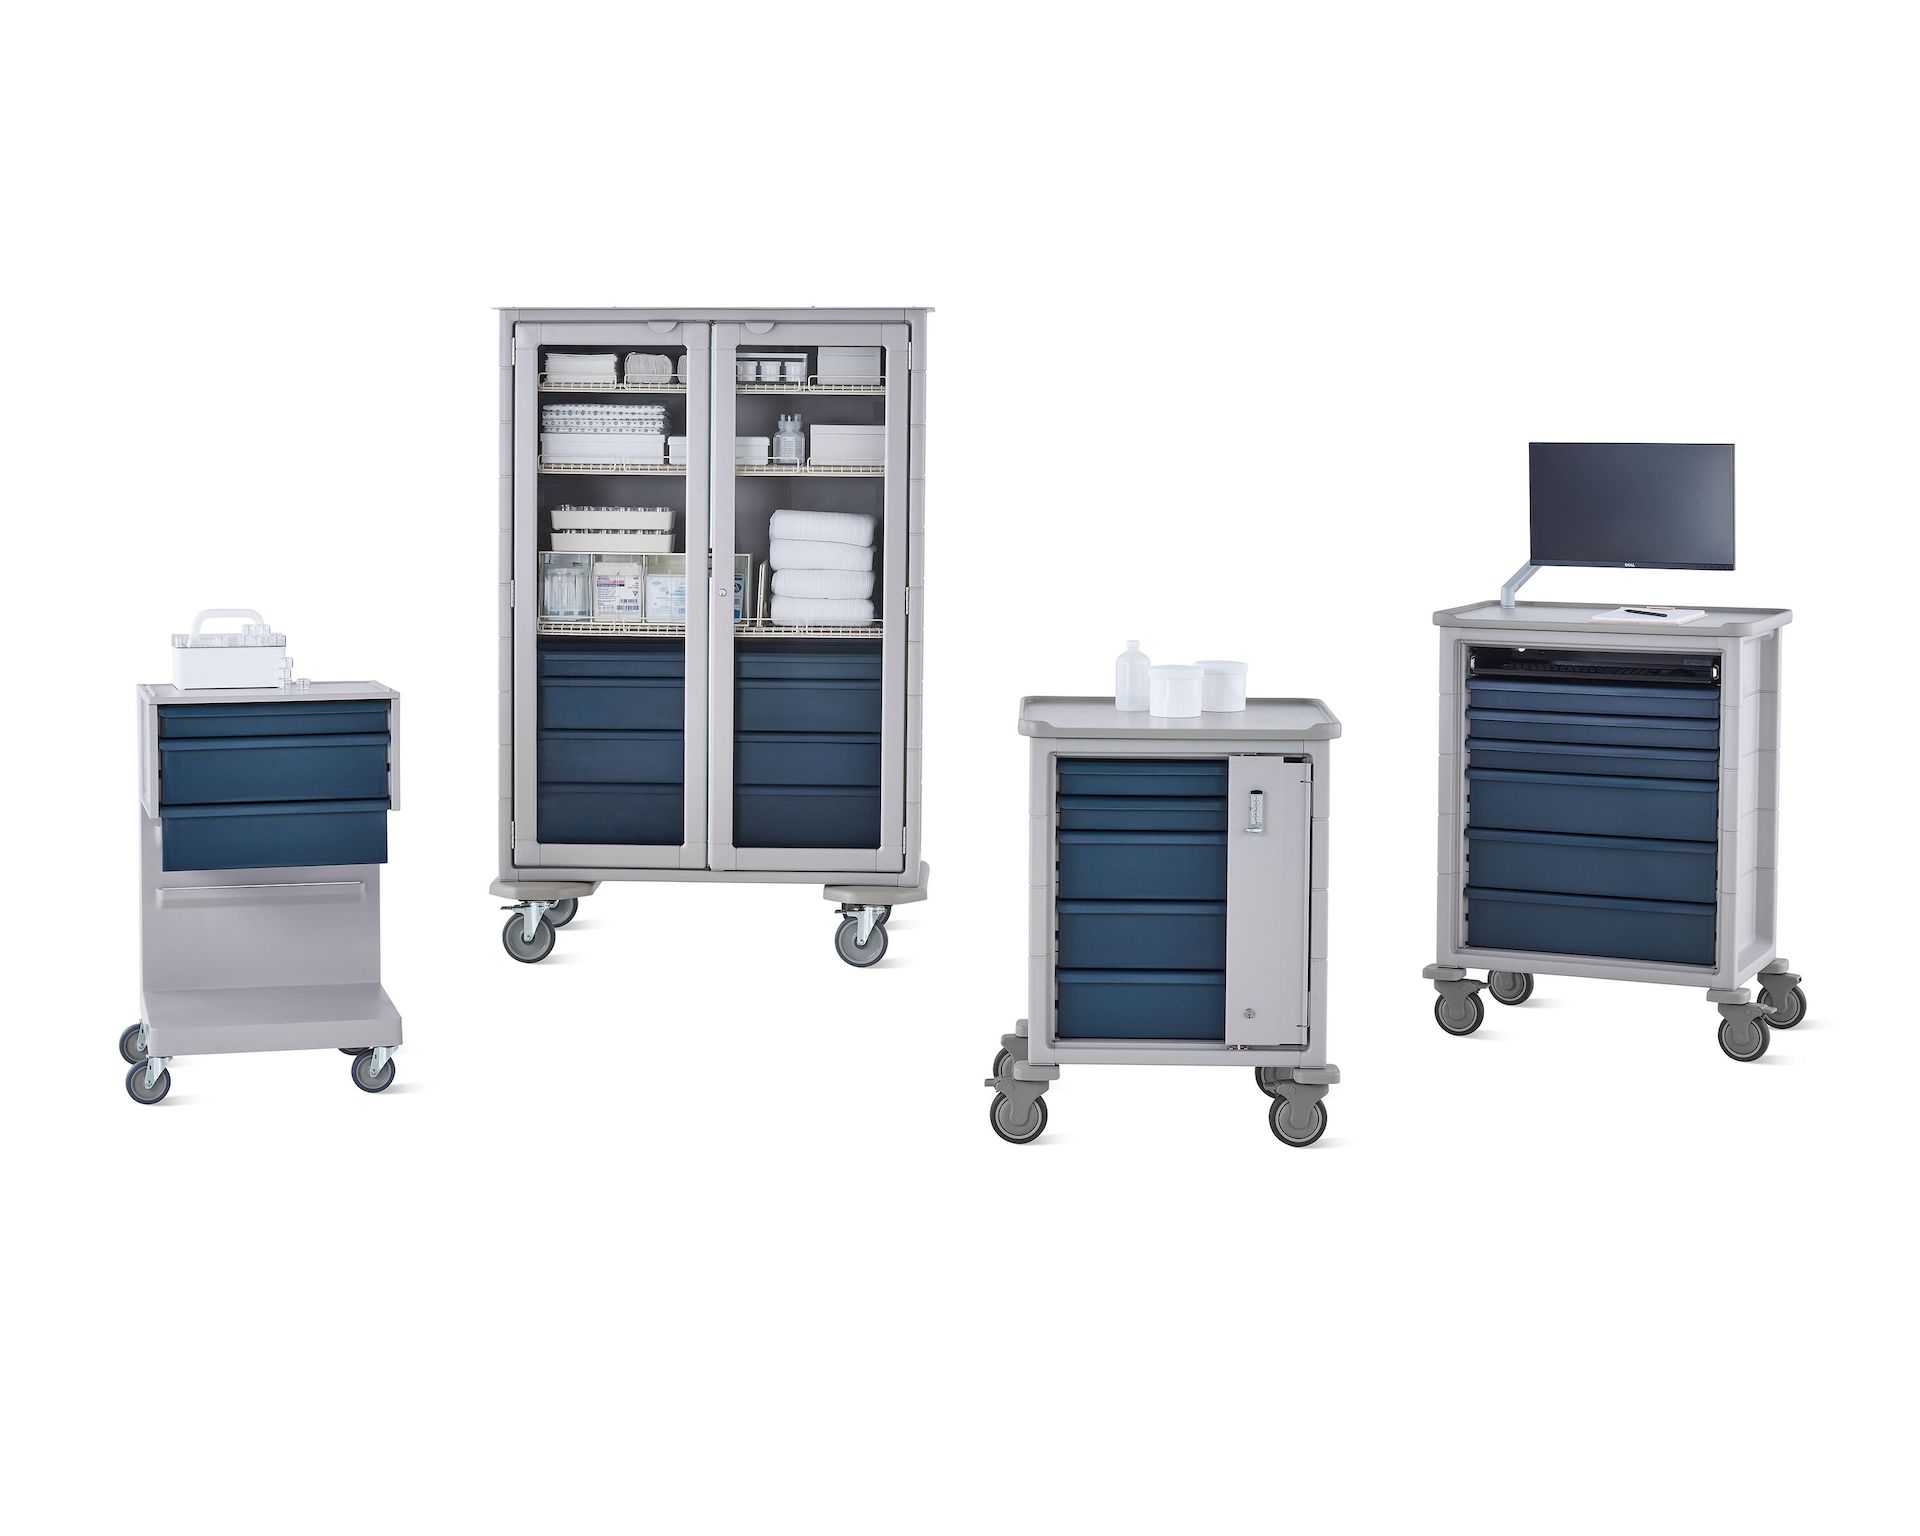 Group of Procedure and Supply Carts including L Cart, double-wide cart, supply cart, and technology cart in light gray body with midnight blue drawers.